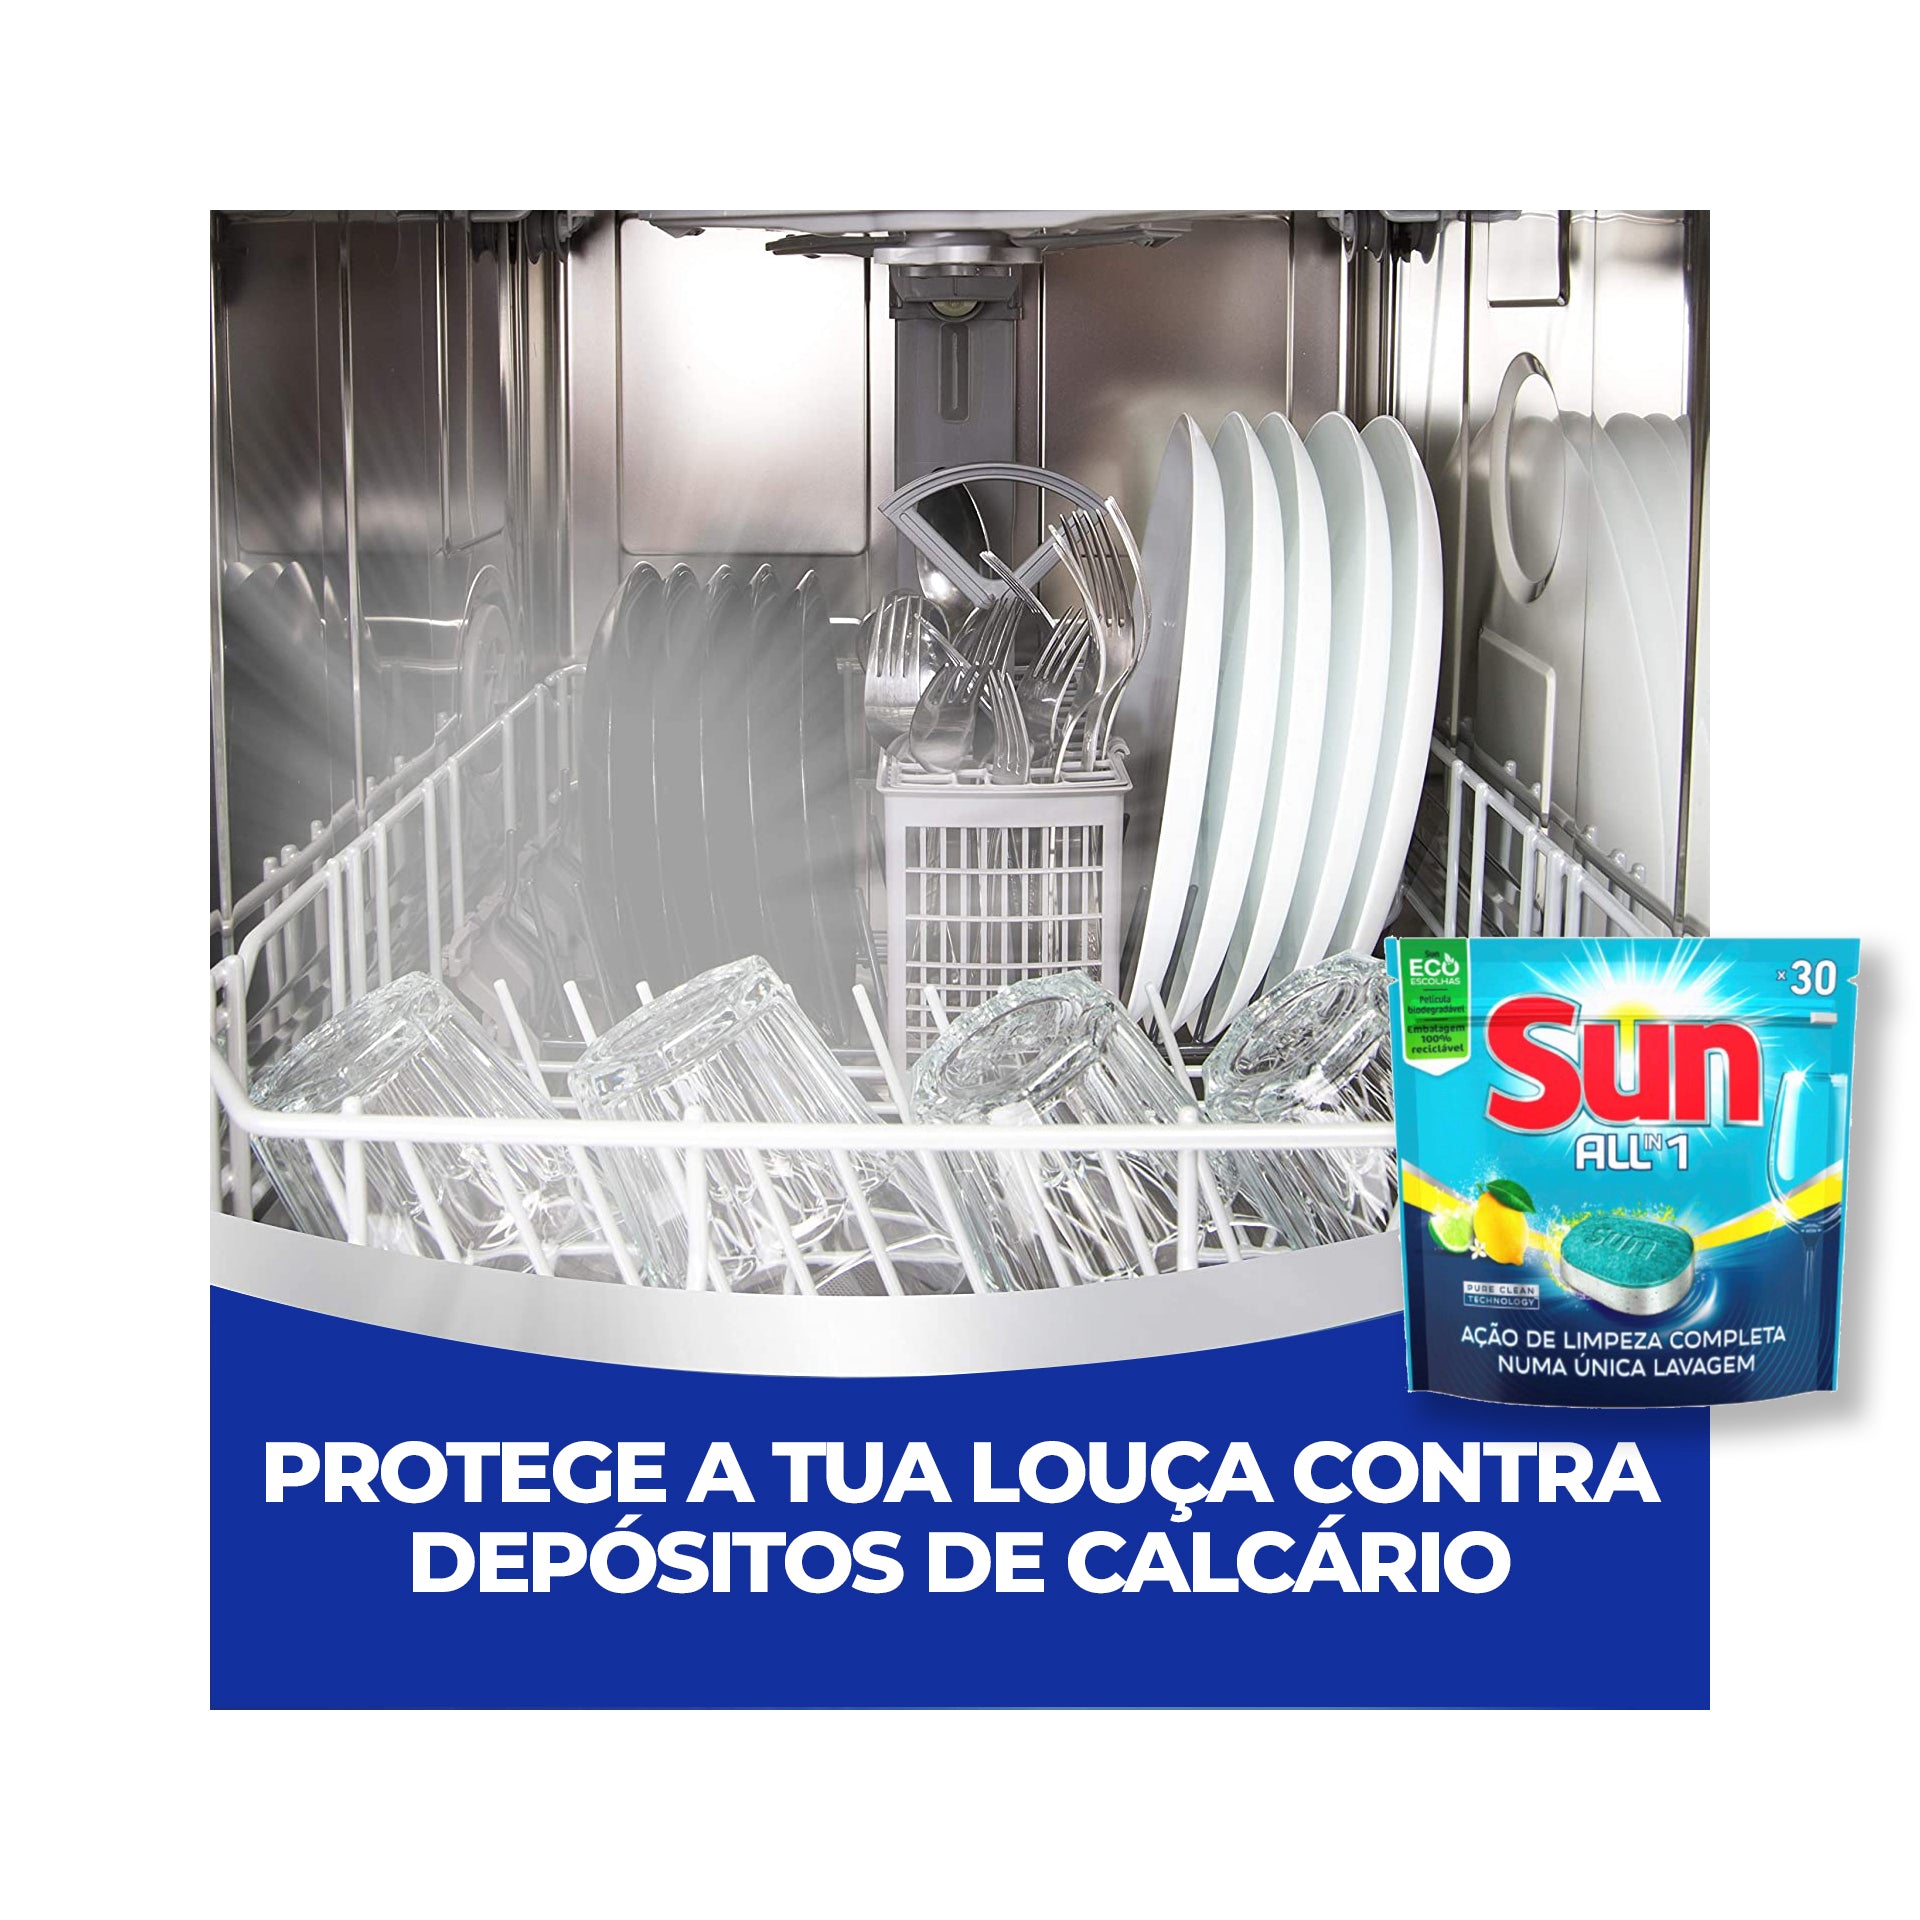 Sun Detergente Máquina Loiça Pastilhas All-In-One Limão 30 Doses - Pack 2 x 30 Doses